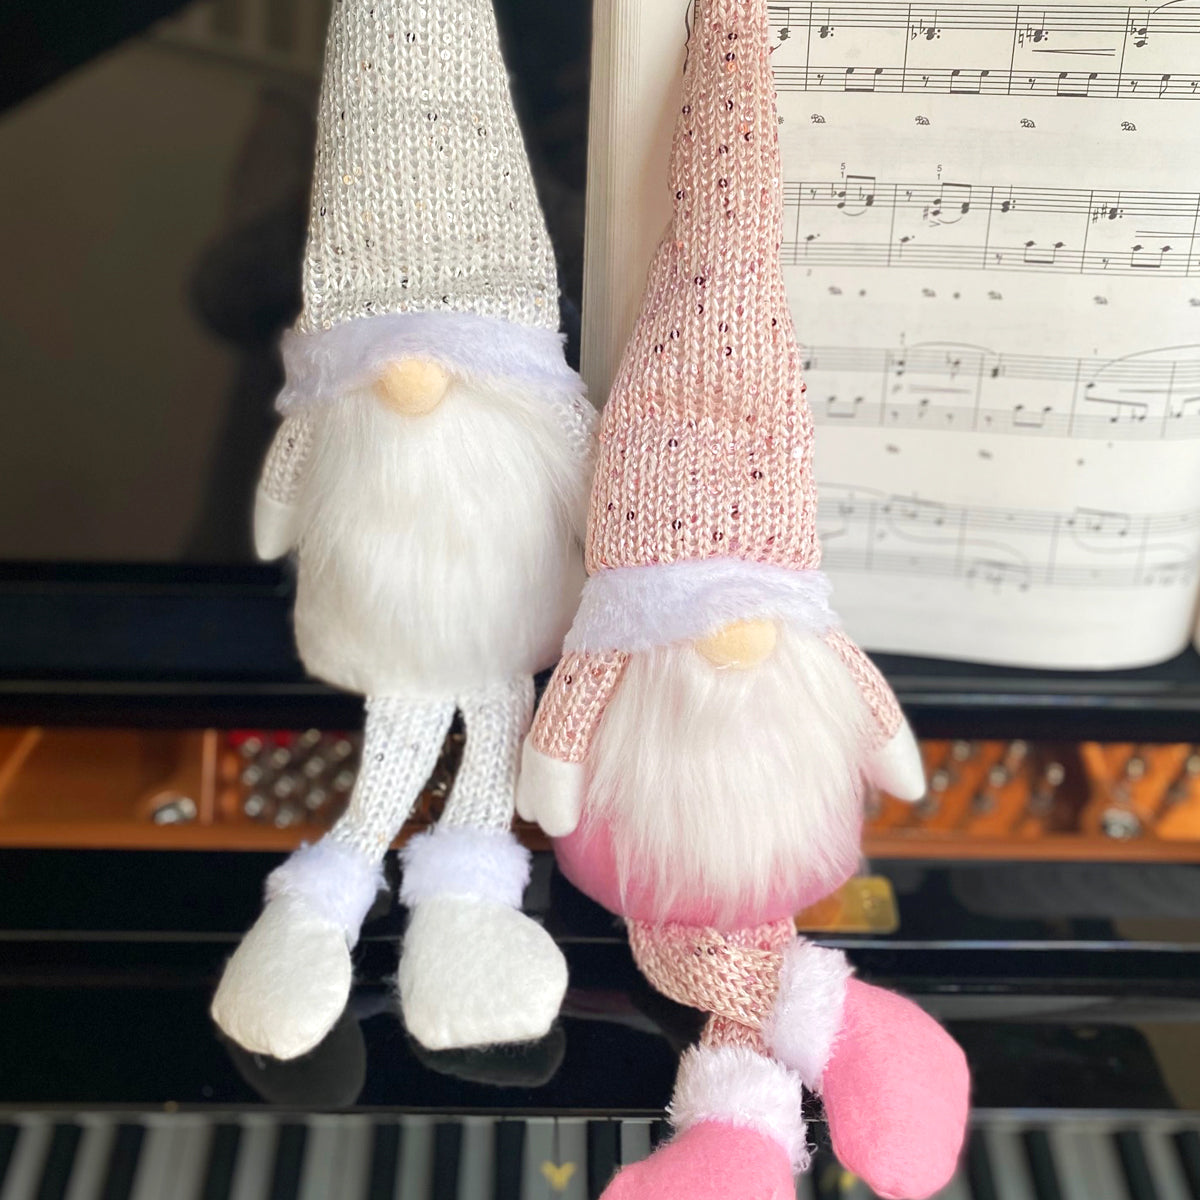 Wrapables Pink & White Sitting Gnome Dolls for Tabletop and Holiday Decorations (Set of 2)